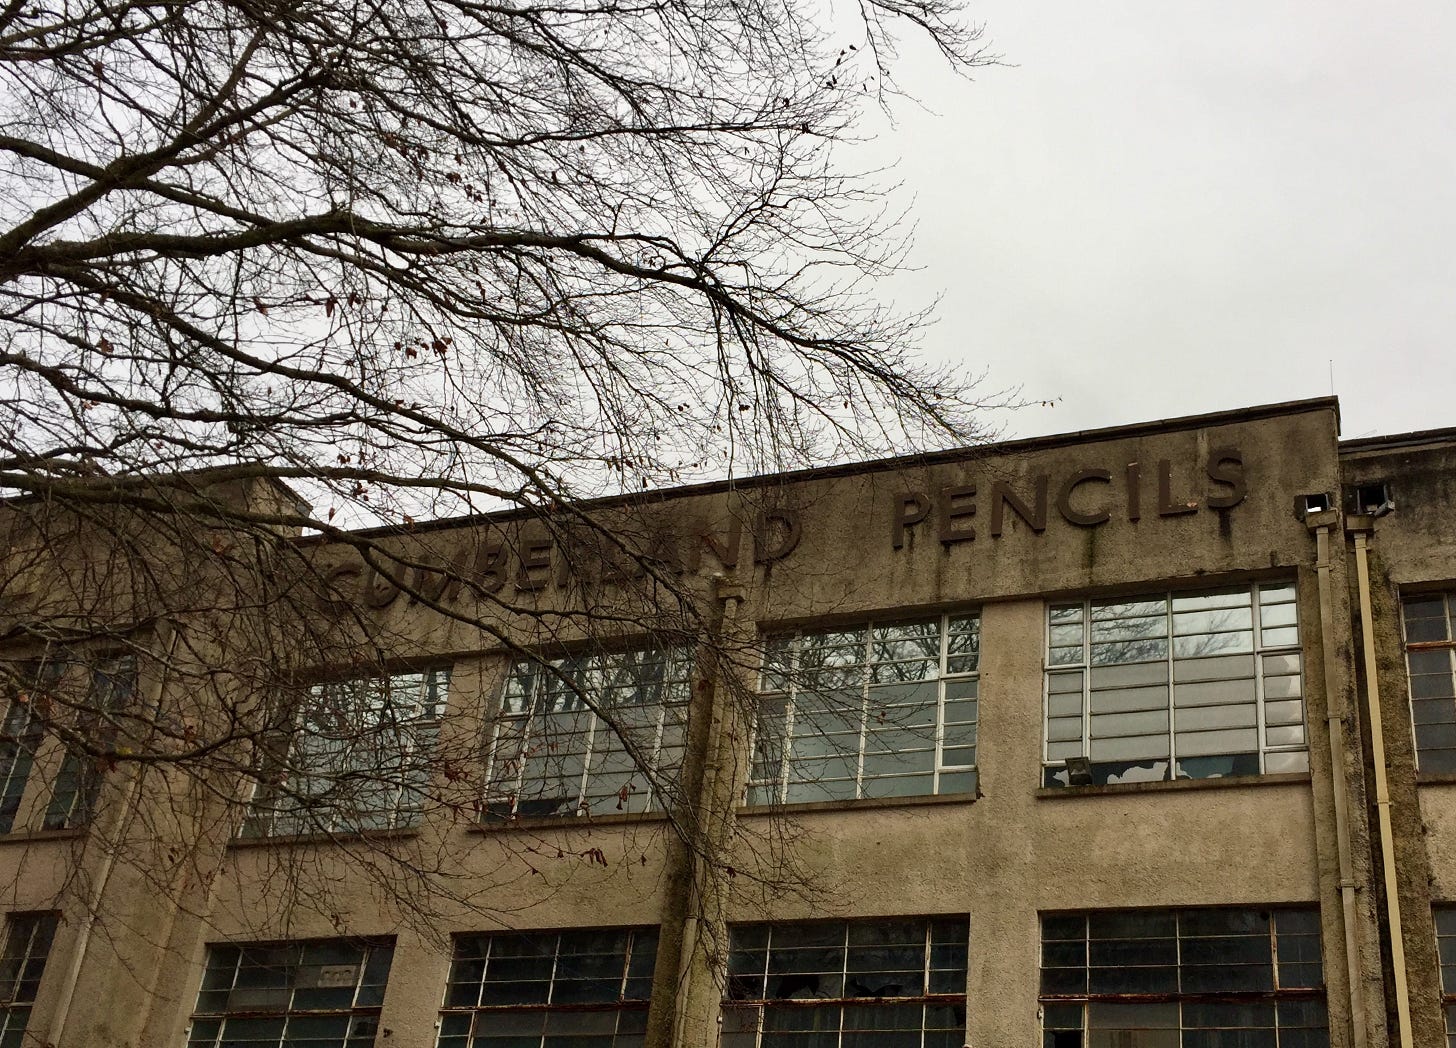 Photograph of the front of a factory, block letters on the front read Cumberland Pencils. The building is disused with a few broken windows. A bare winter tree is in the foreground